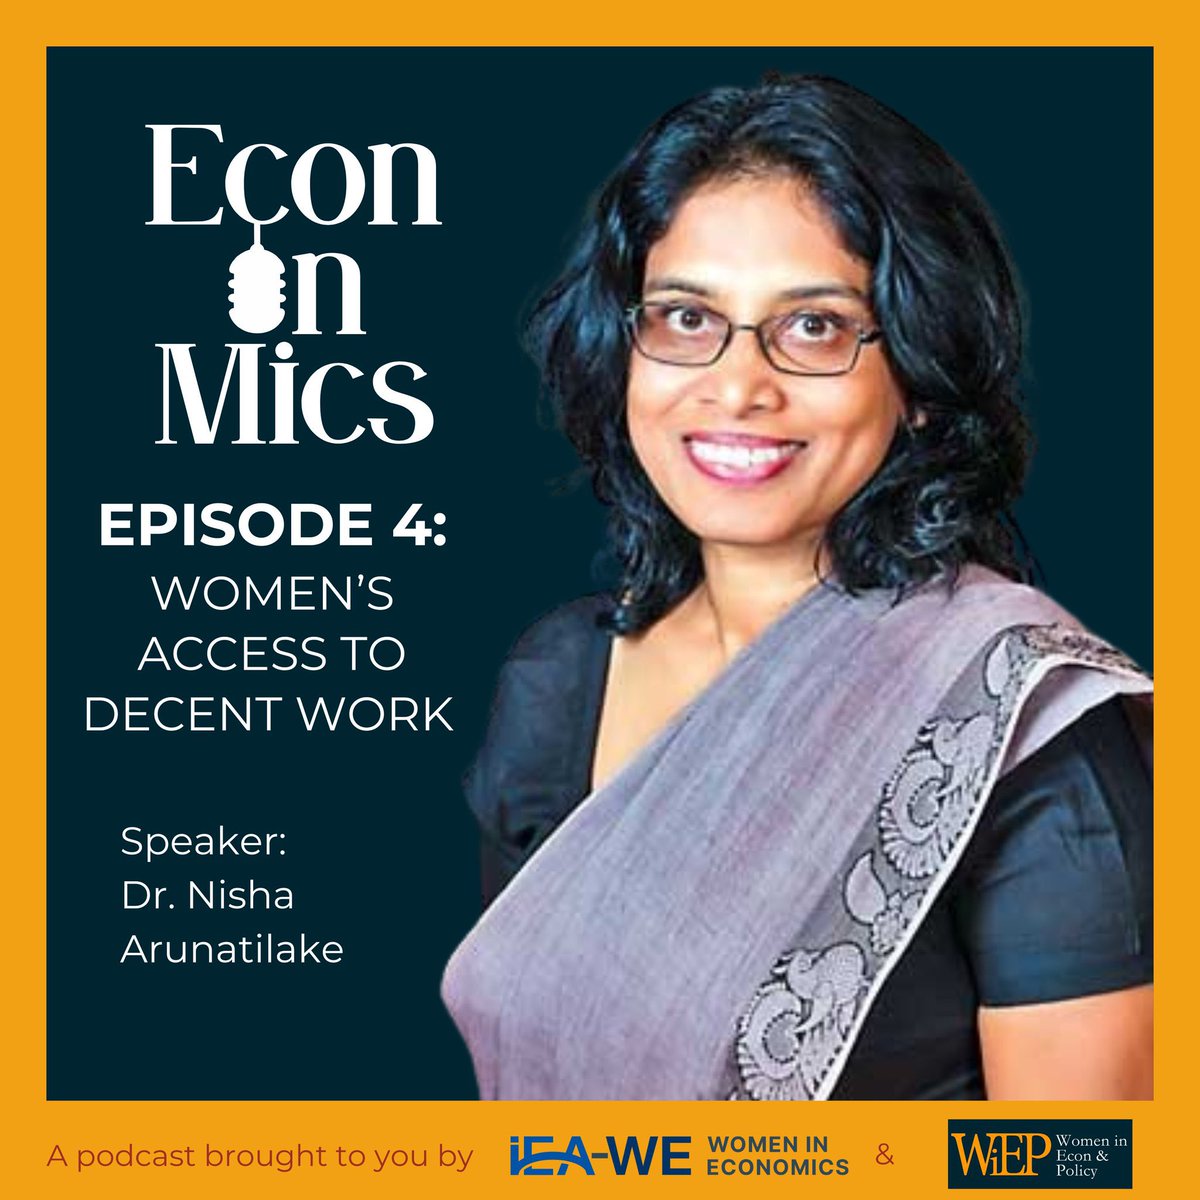 #EconTwitter What can we learn from assessing the quality of job opportunities available to women? Dr. Nisha Arunatilake @ArunatilakeN shares her expert insights on the latest 🎙️Econ-on-Mics #podcast episode! Tune in 🔗 bit.ly/4dvk33u